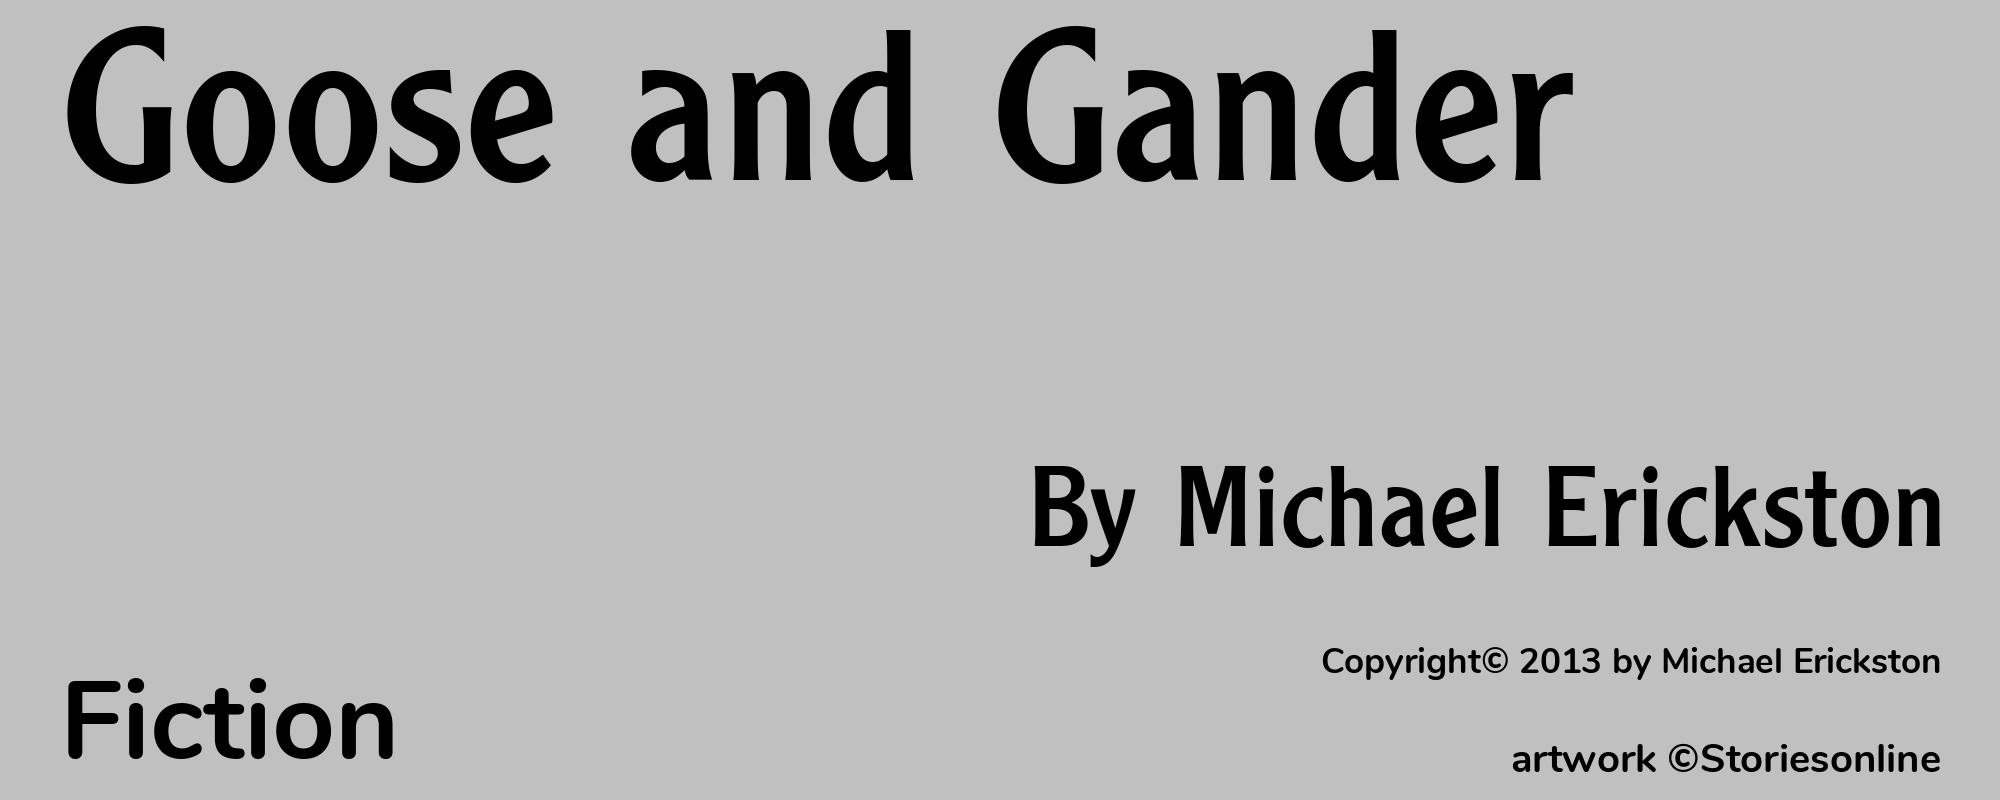 Goose and Gander - Cover